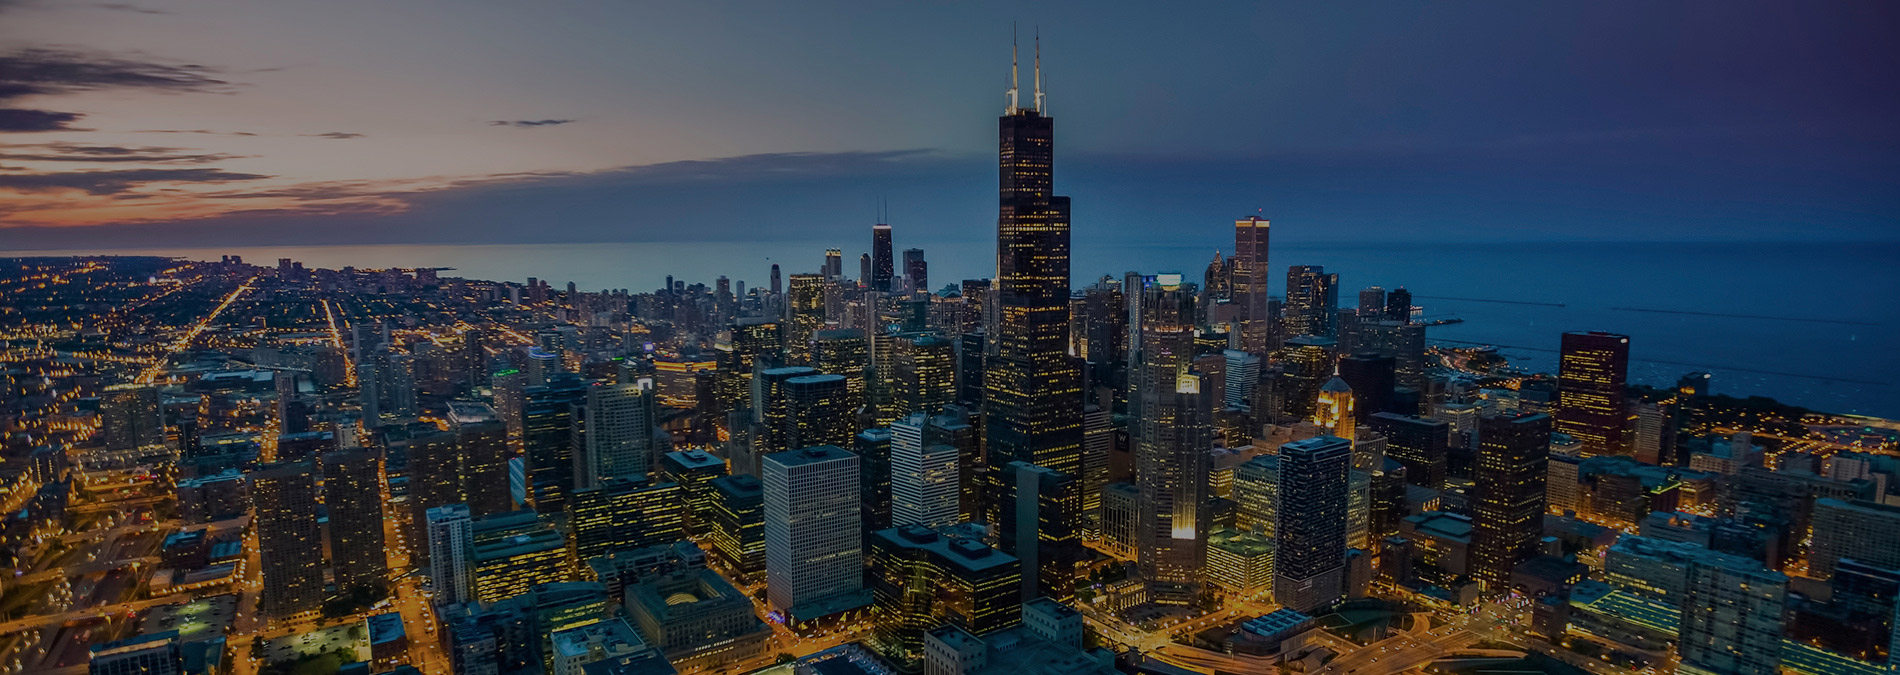 chicago-skyline-at-dusk-sears-tower